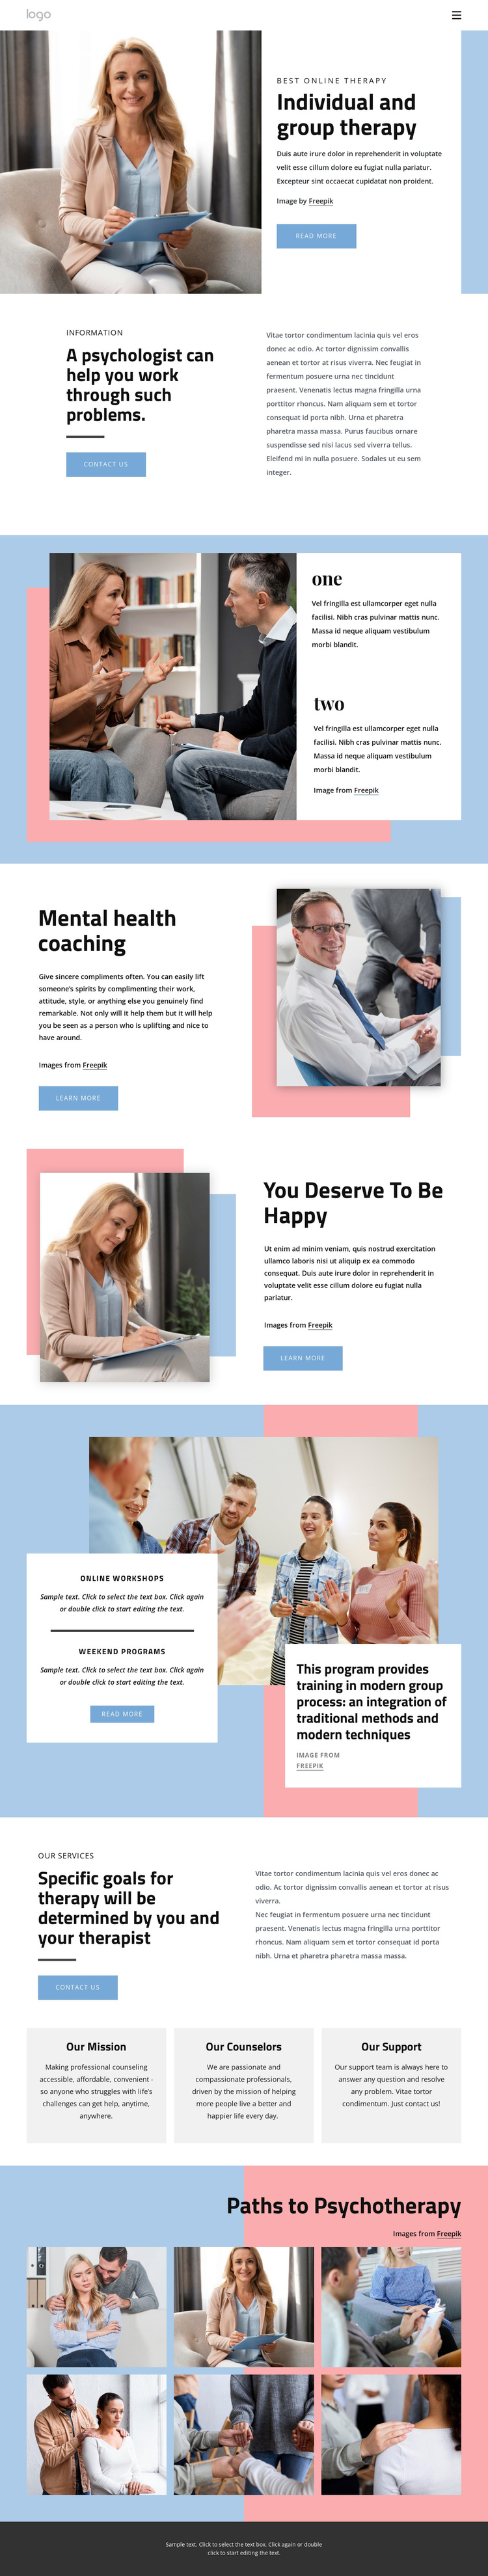 Undividual and group therapy Website Builder Software